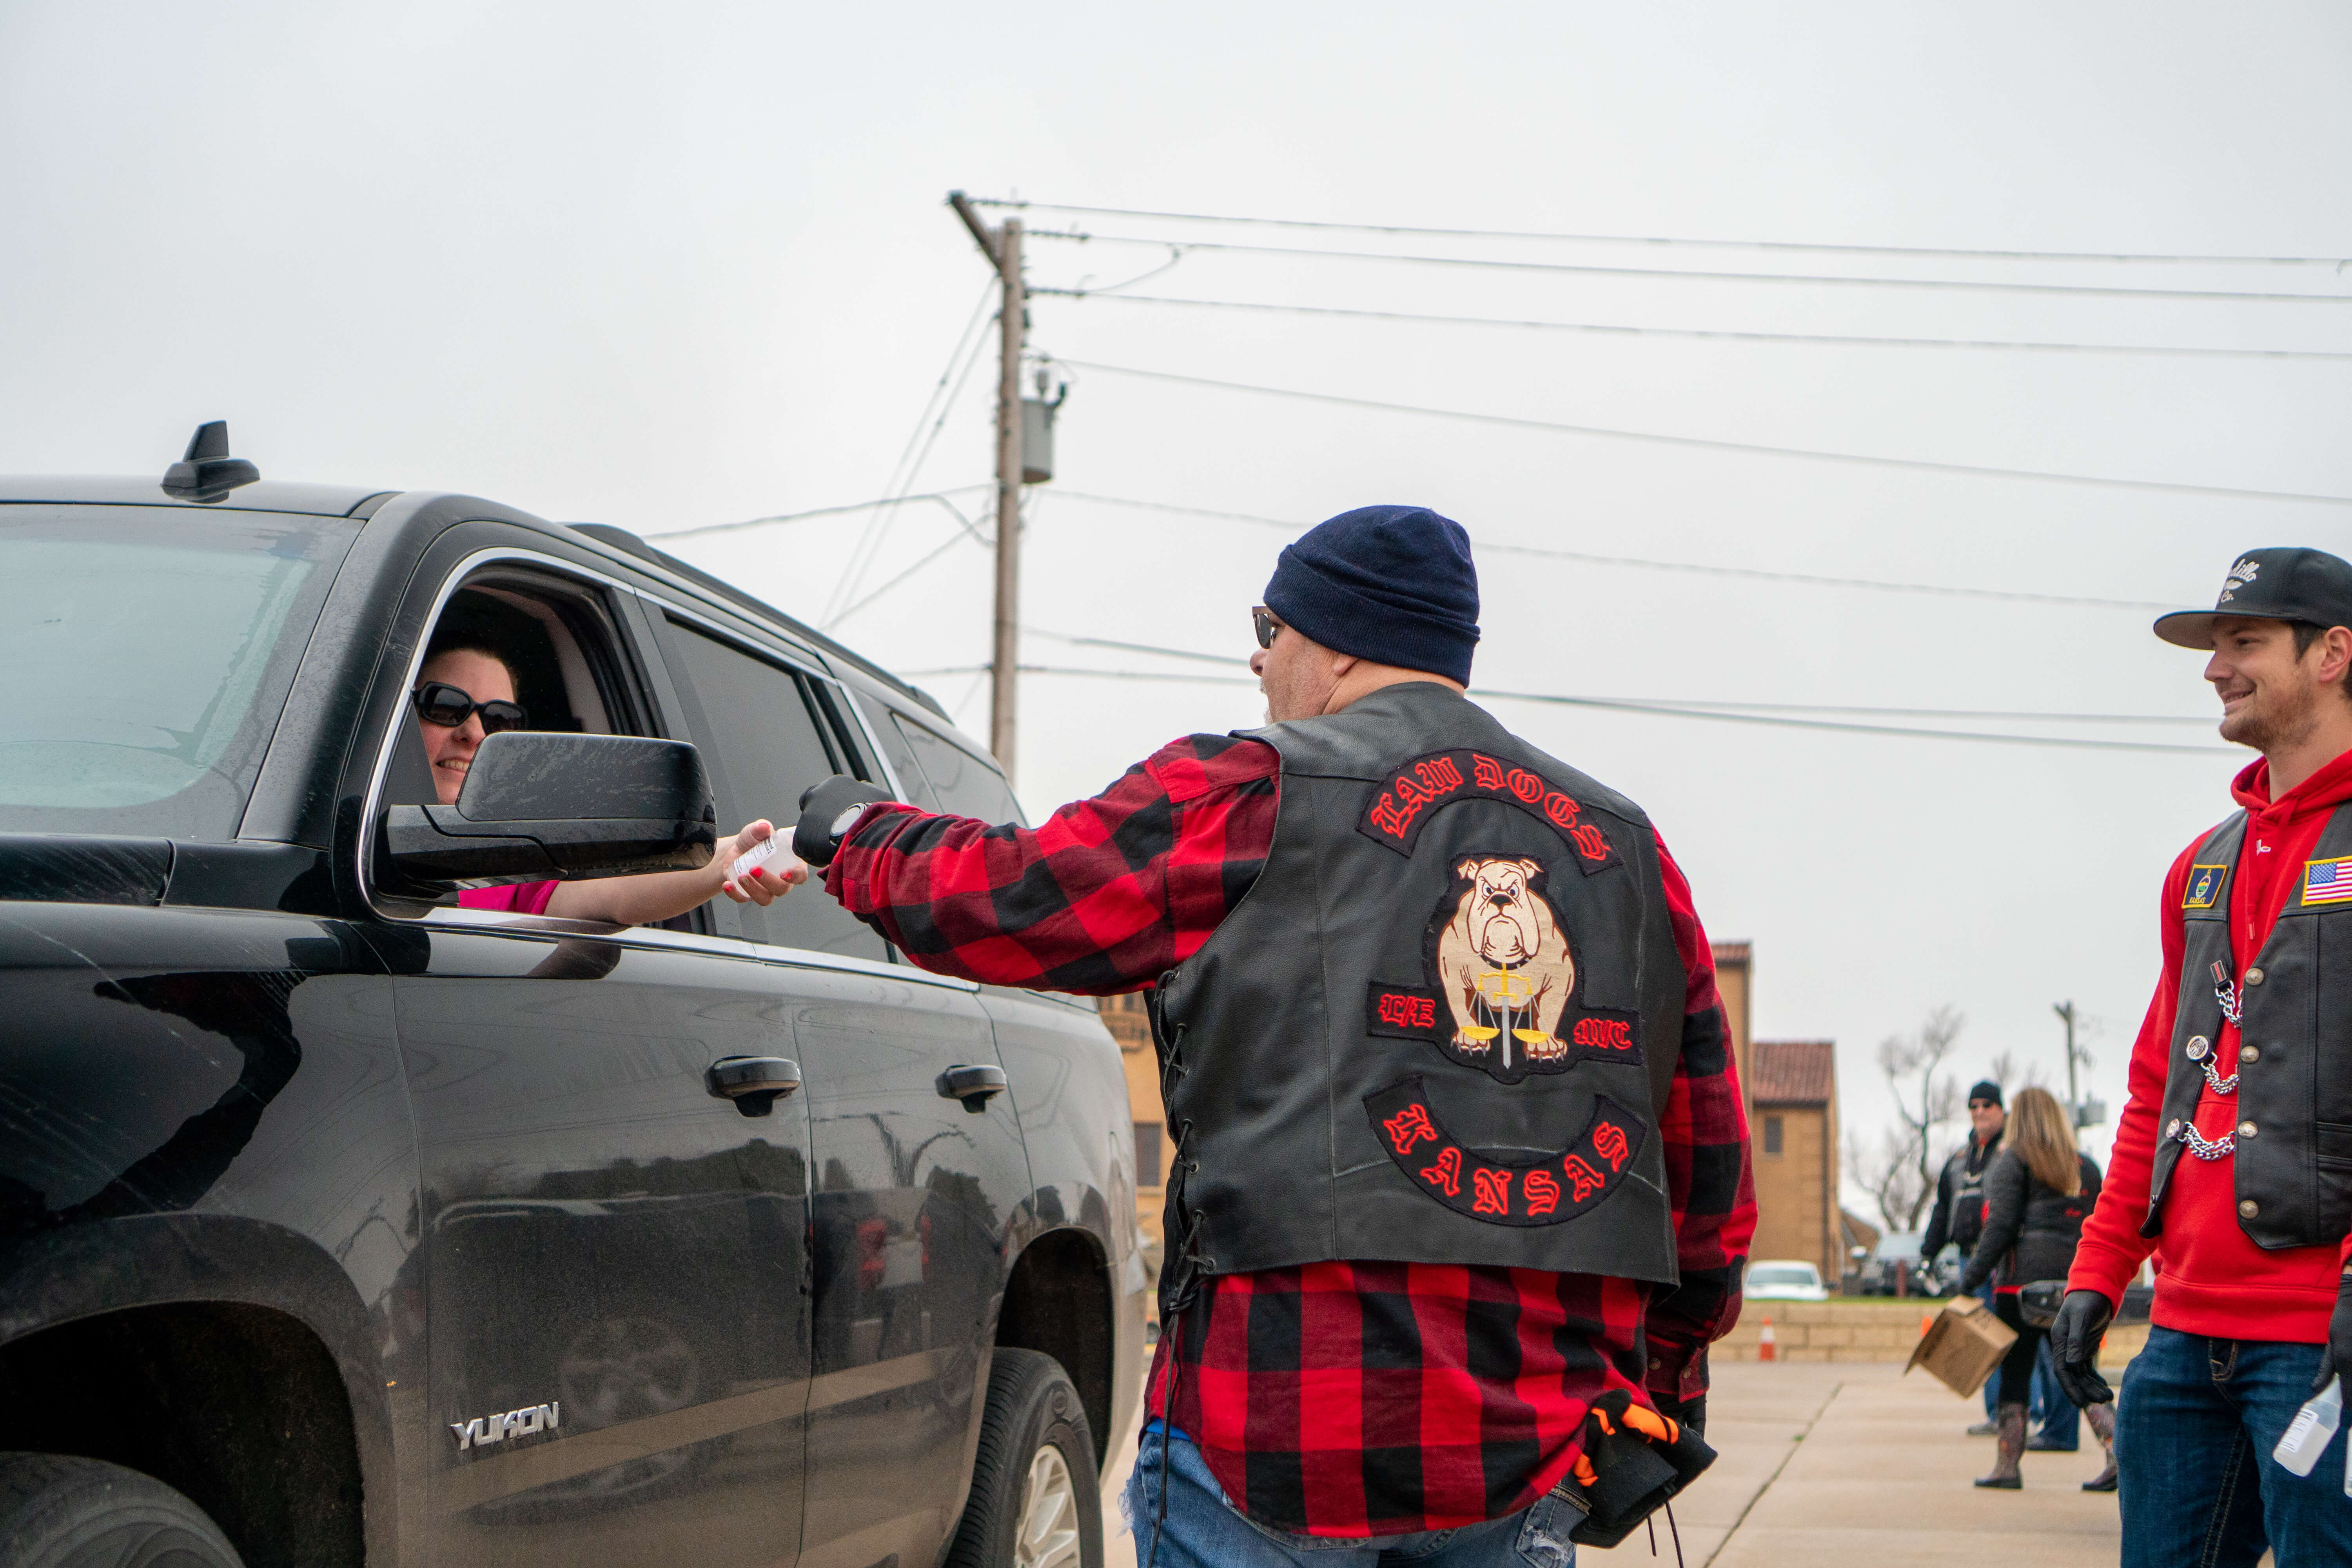 The Kansas chapter Law Dogs motorcycle club came to help distribute hand cleanser!